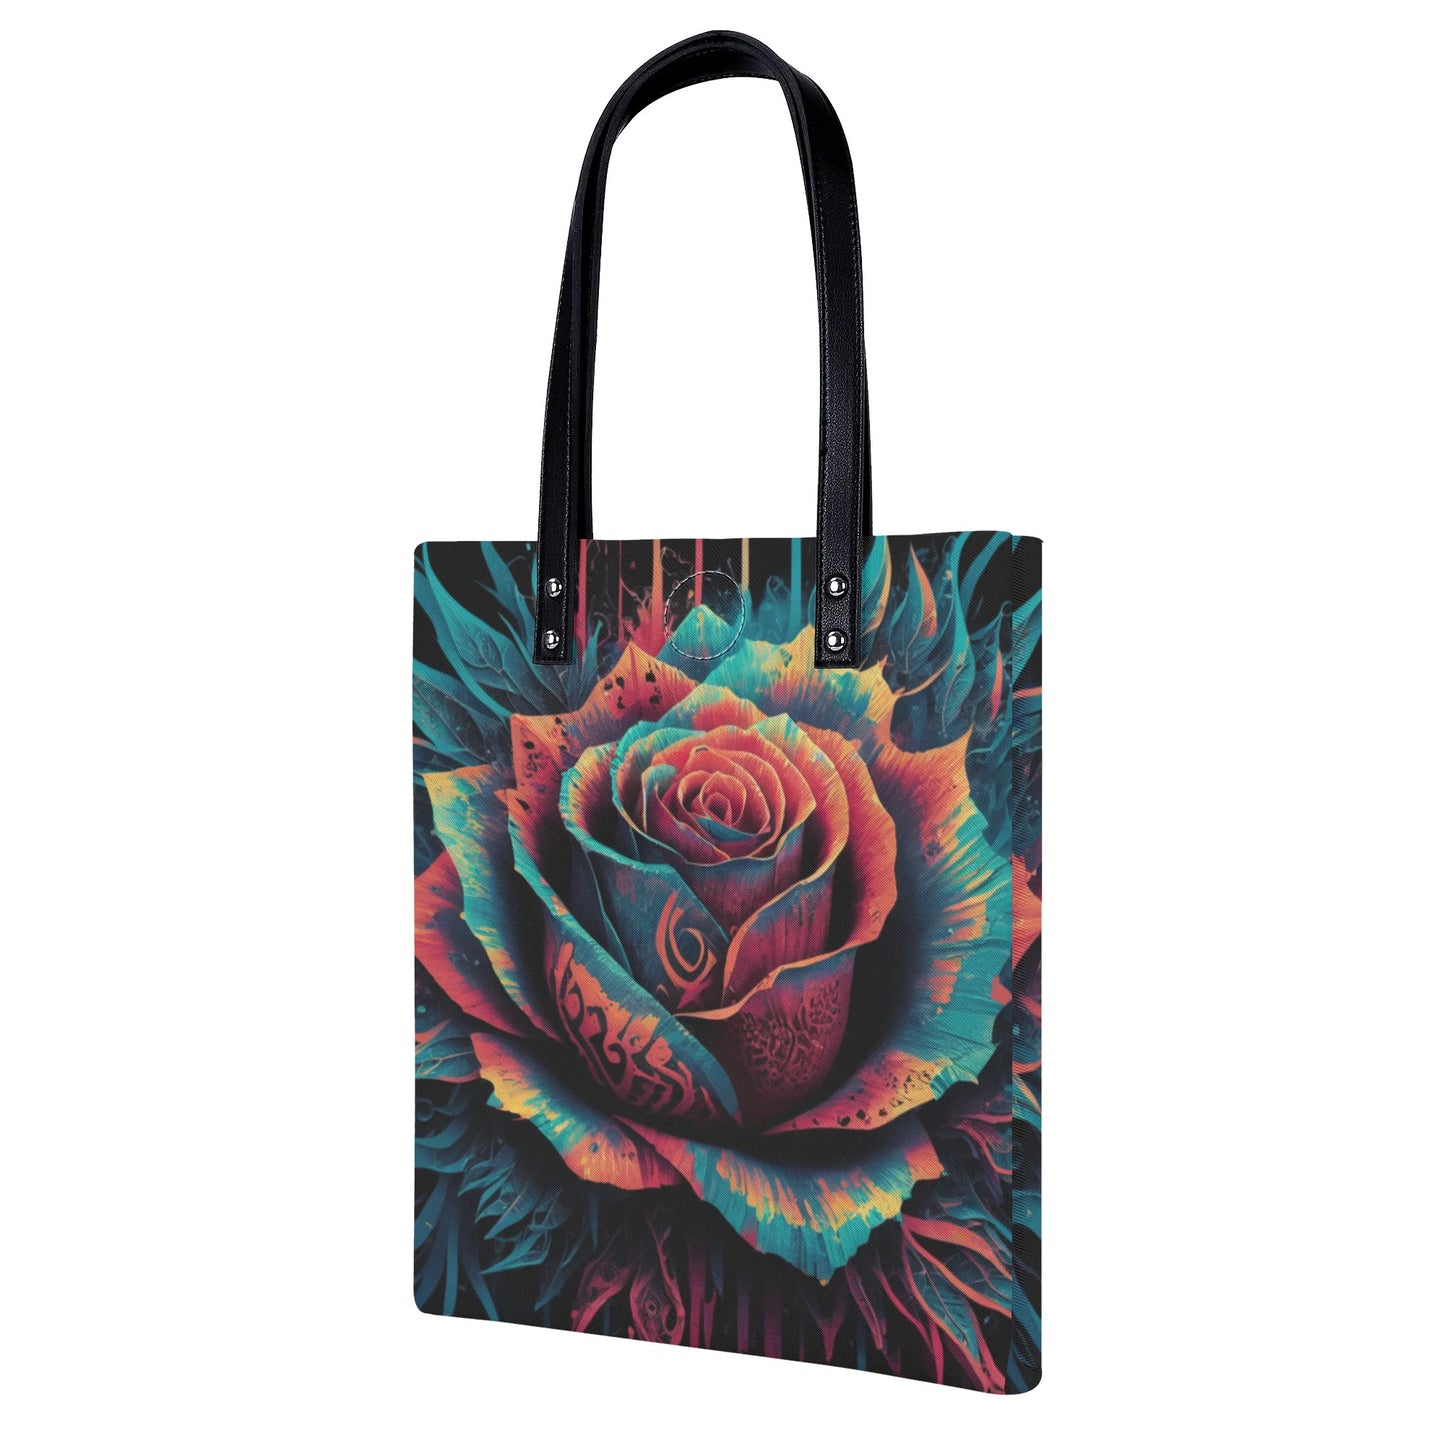 Tribal Rose Patter Leather Tote Bag